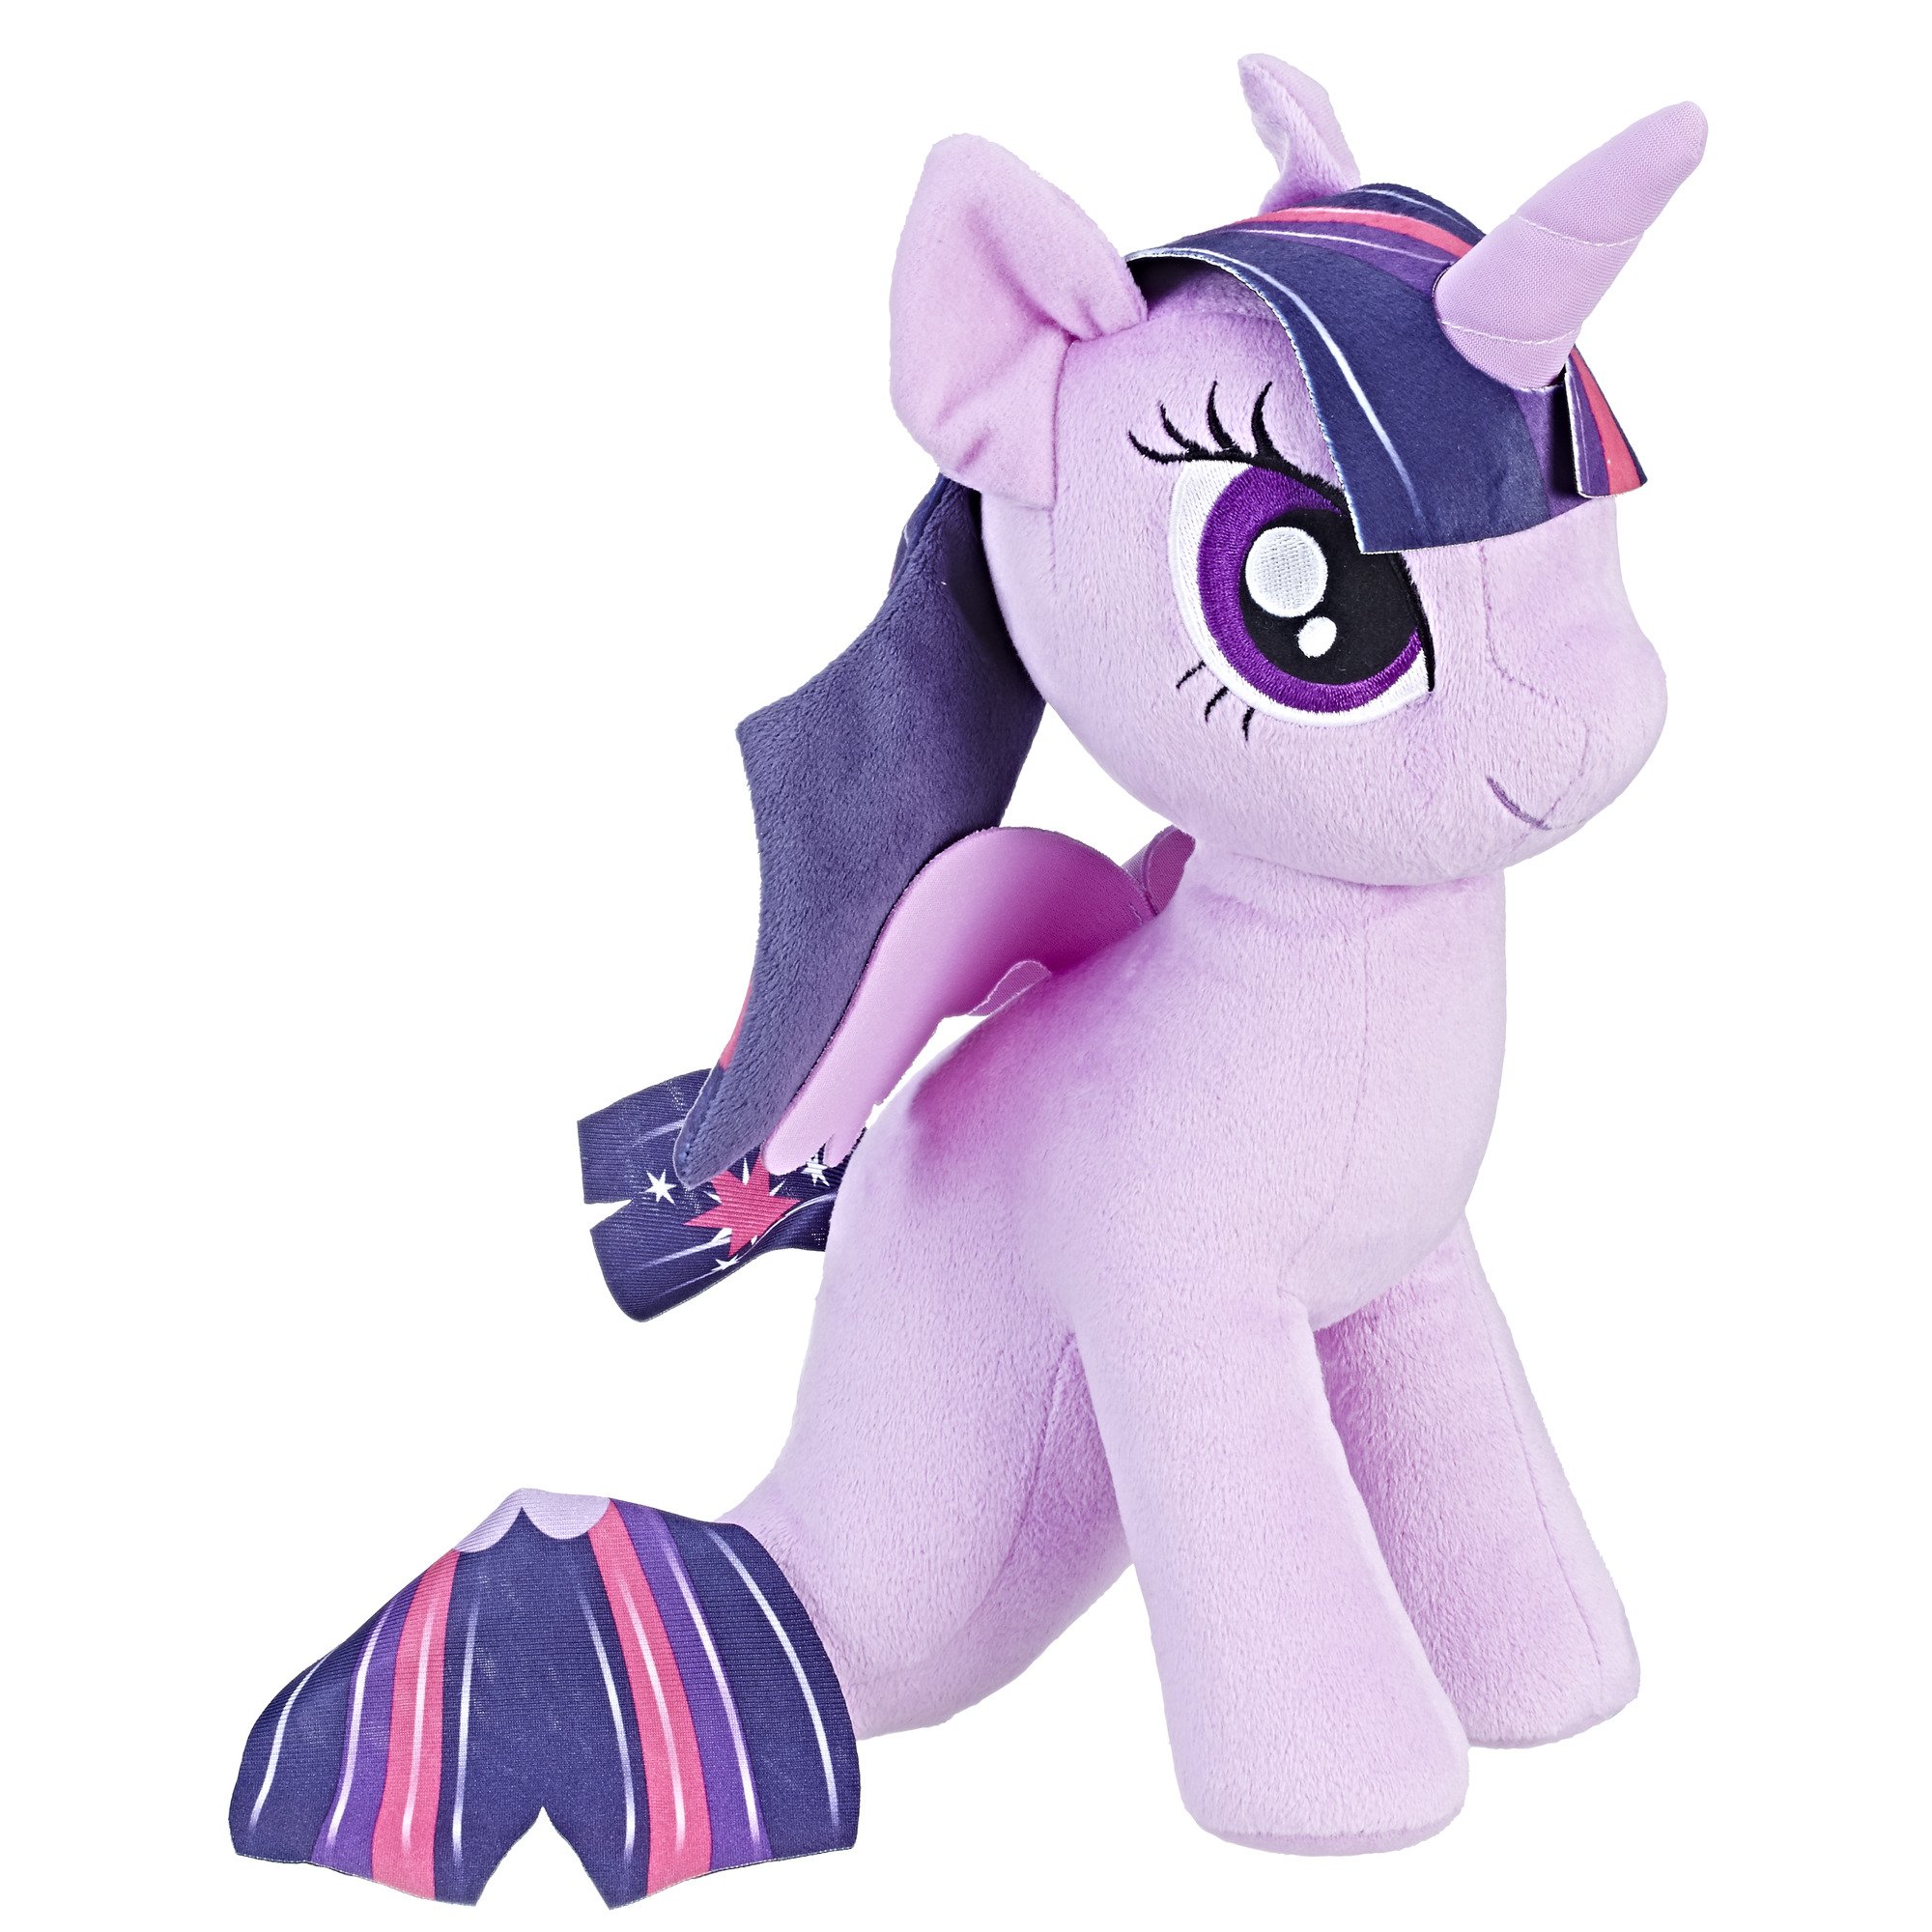 Adorable My Little Pony Cuddly Toy: A Must-Have for Fans